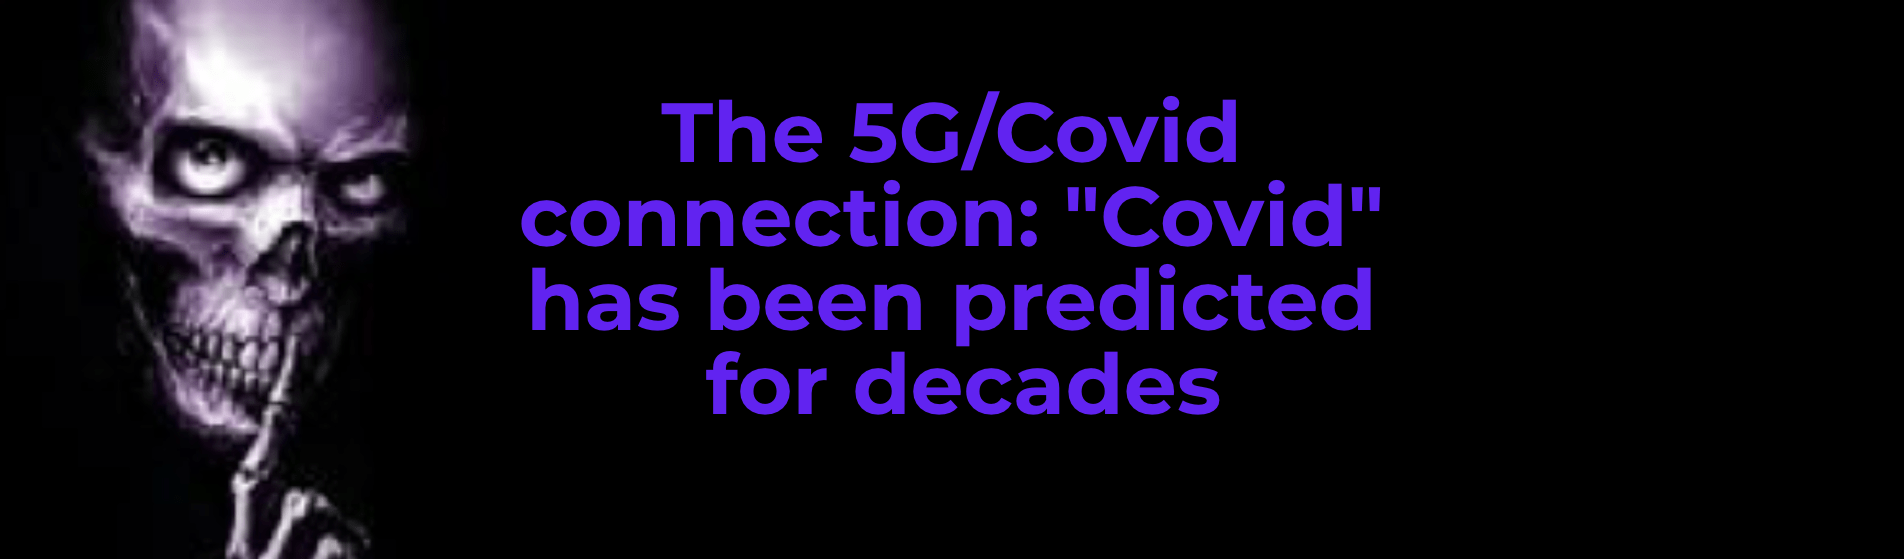 The 5G:Covid connection- 